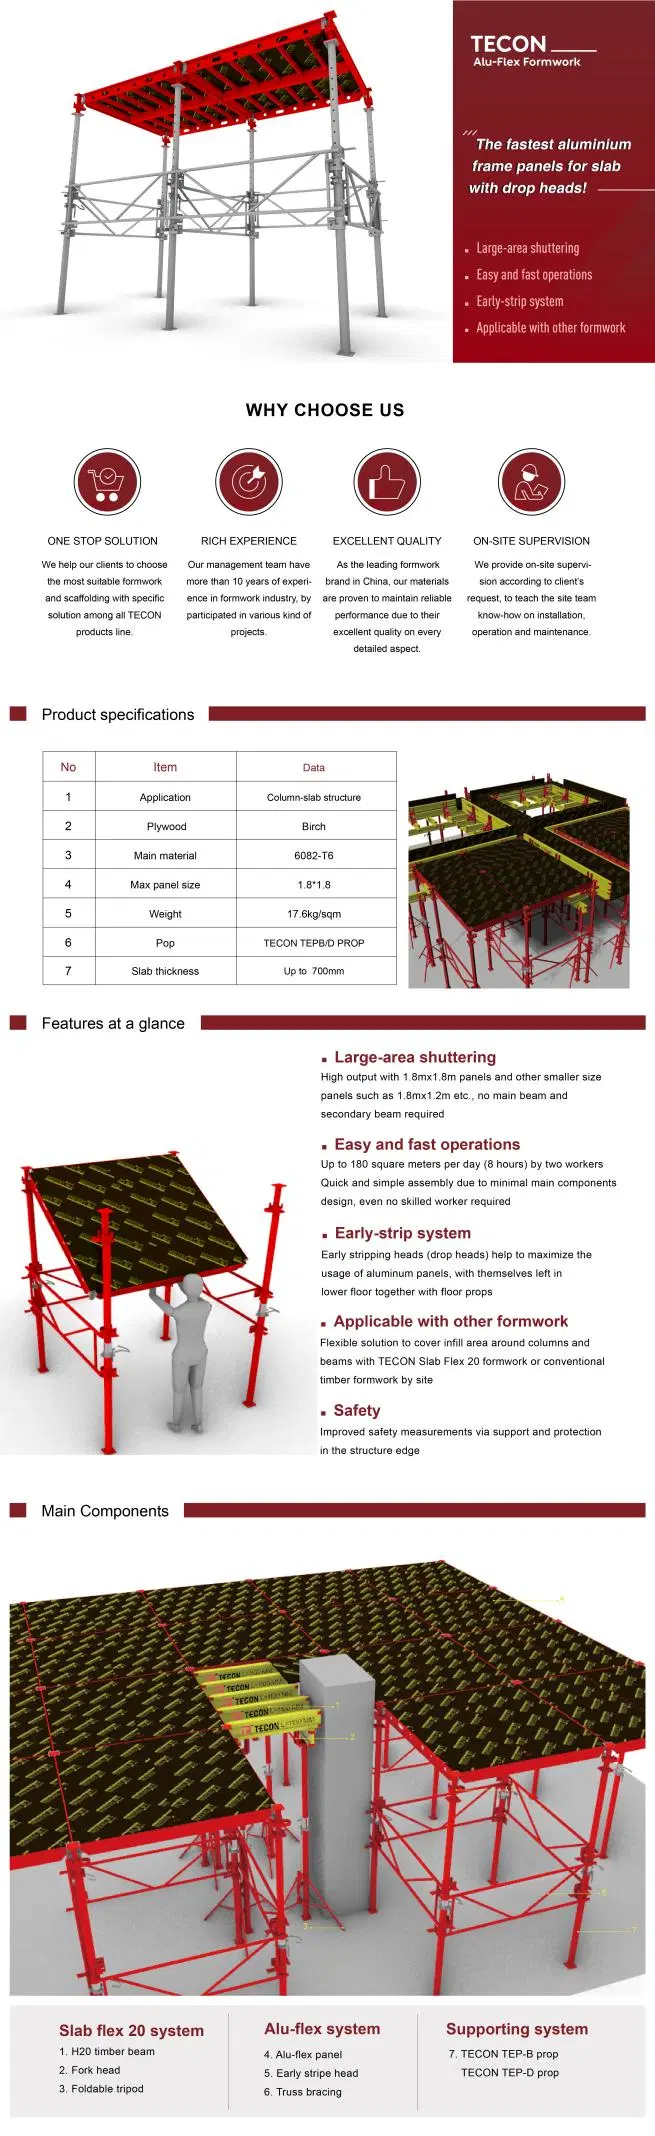 Tecon Quick Release Table Form Perfect Slab Formwork Solution for Building